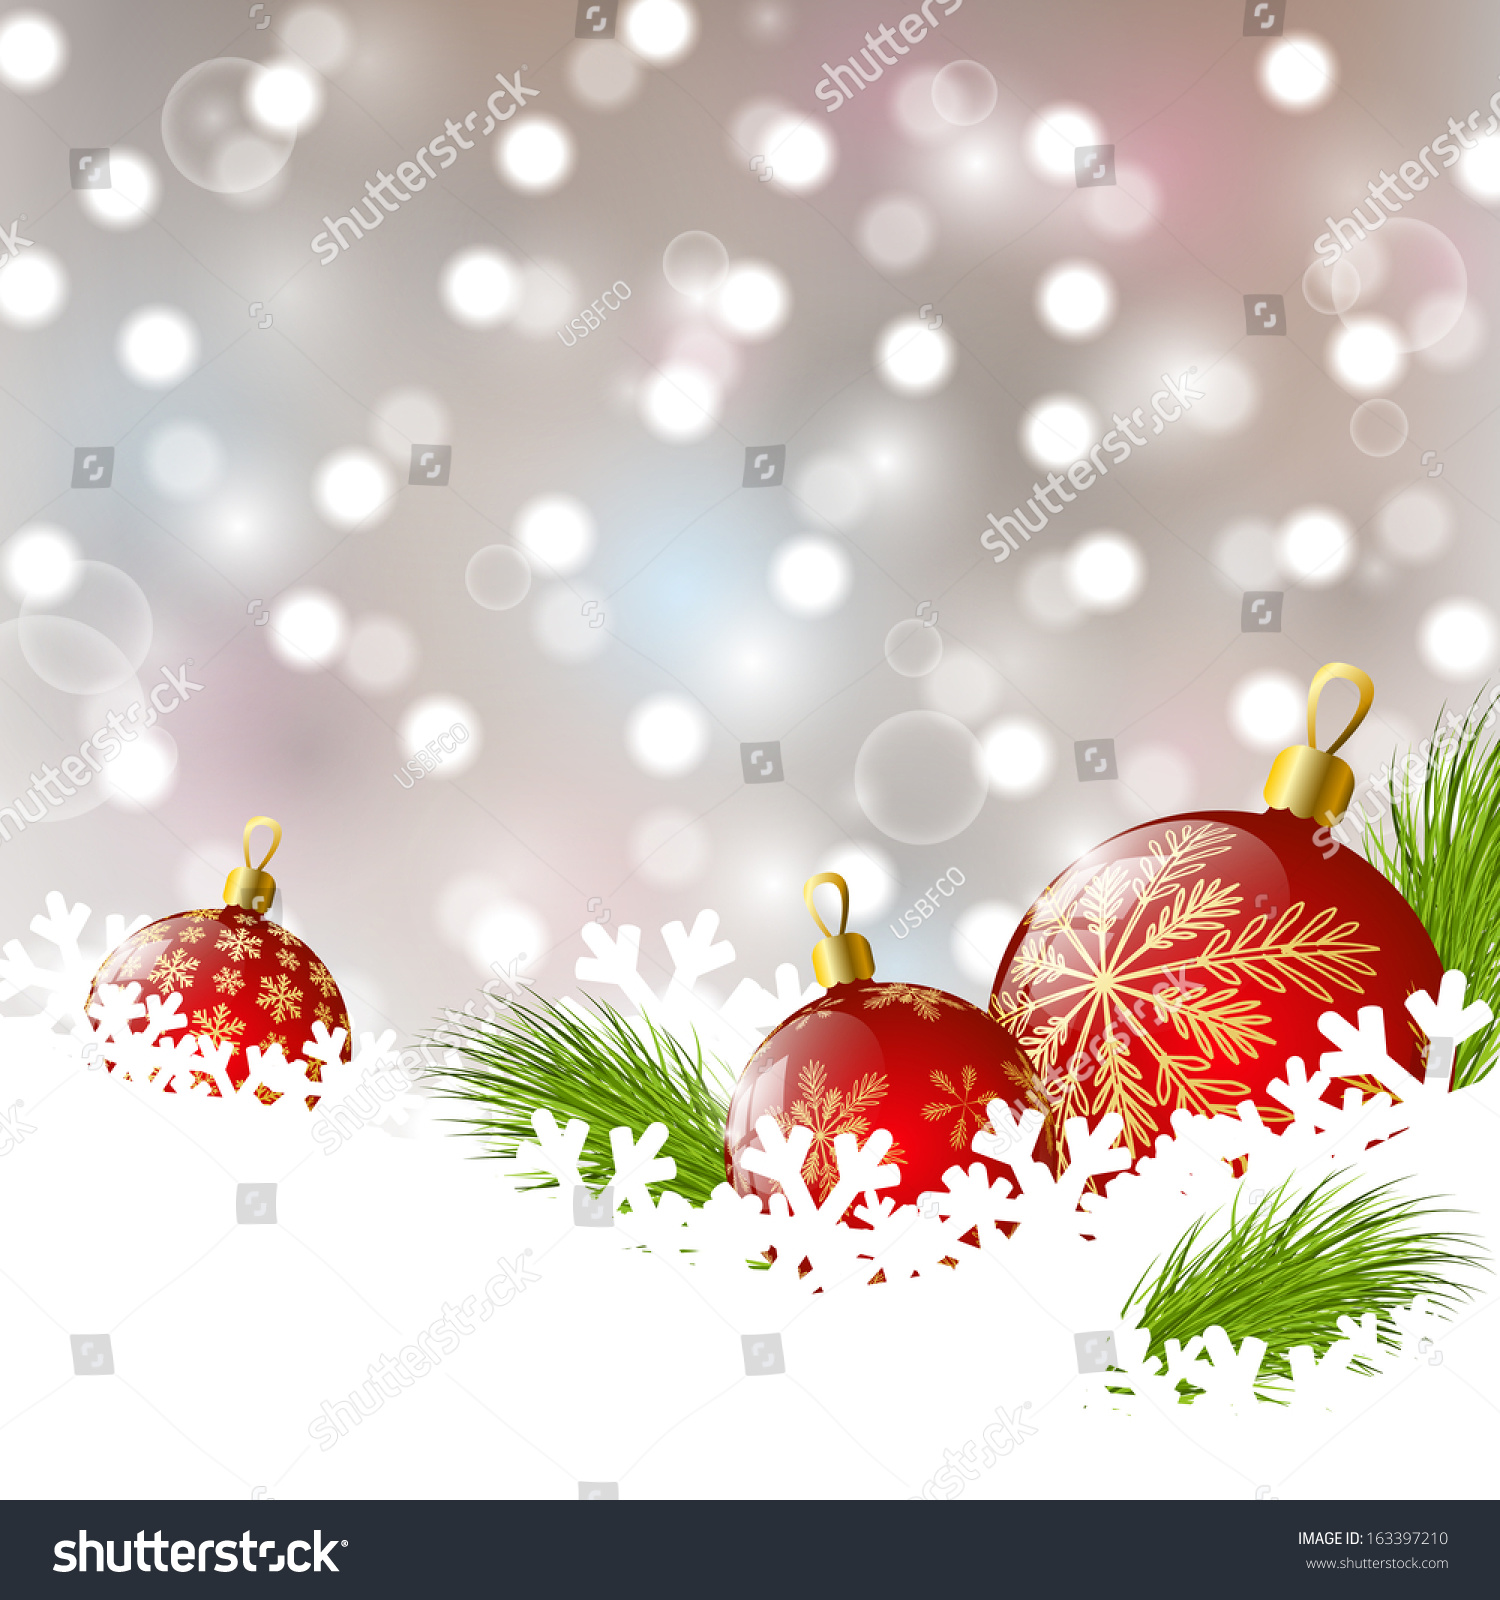 Christmas background with red balls on the snow #163397210